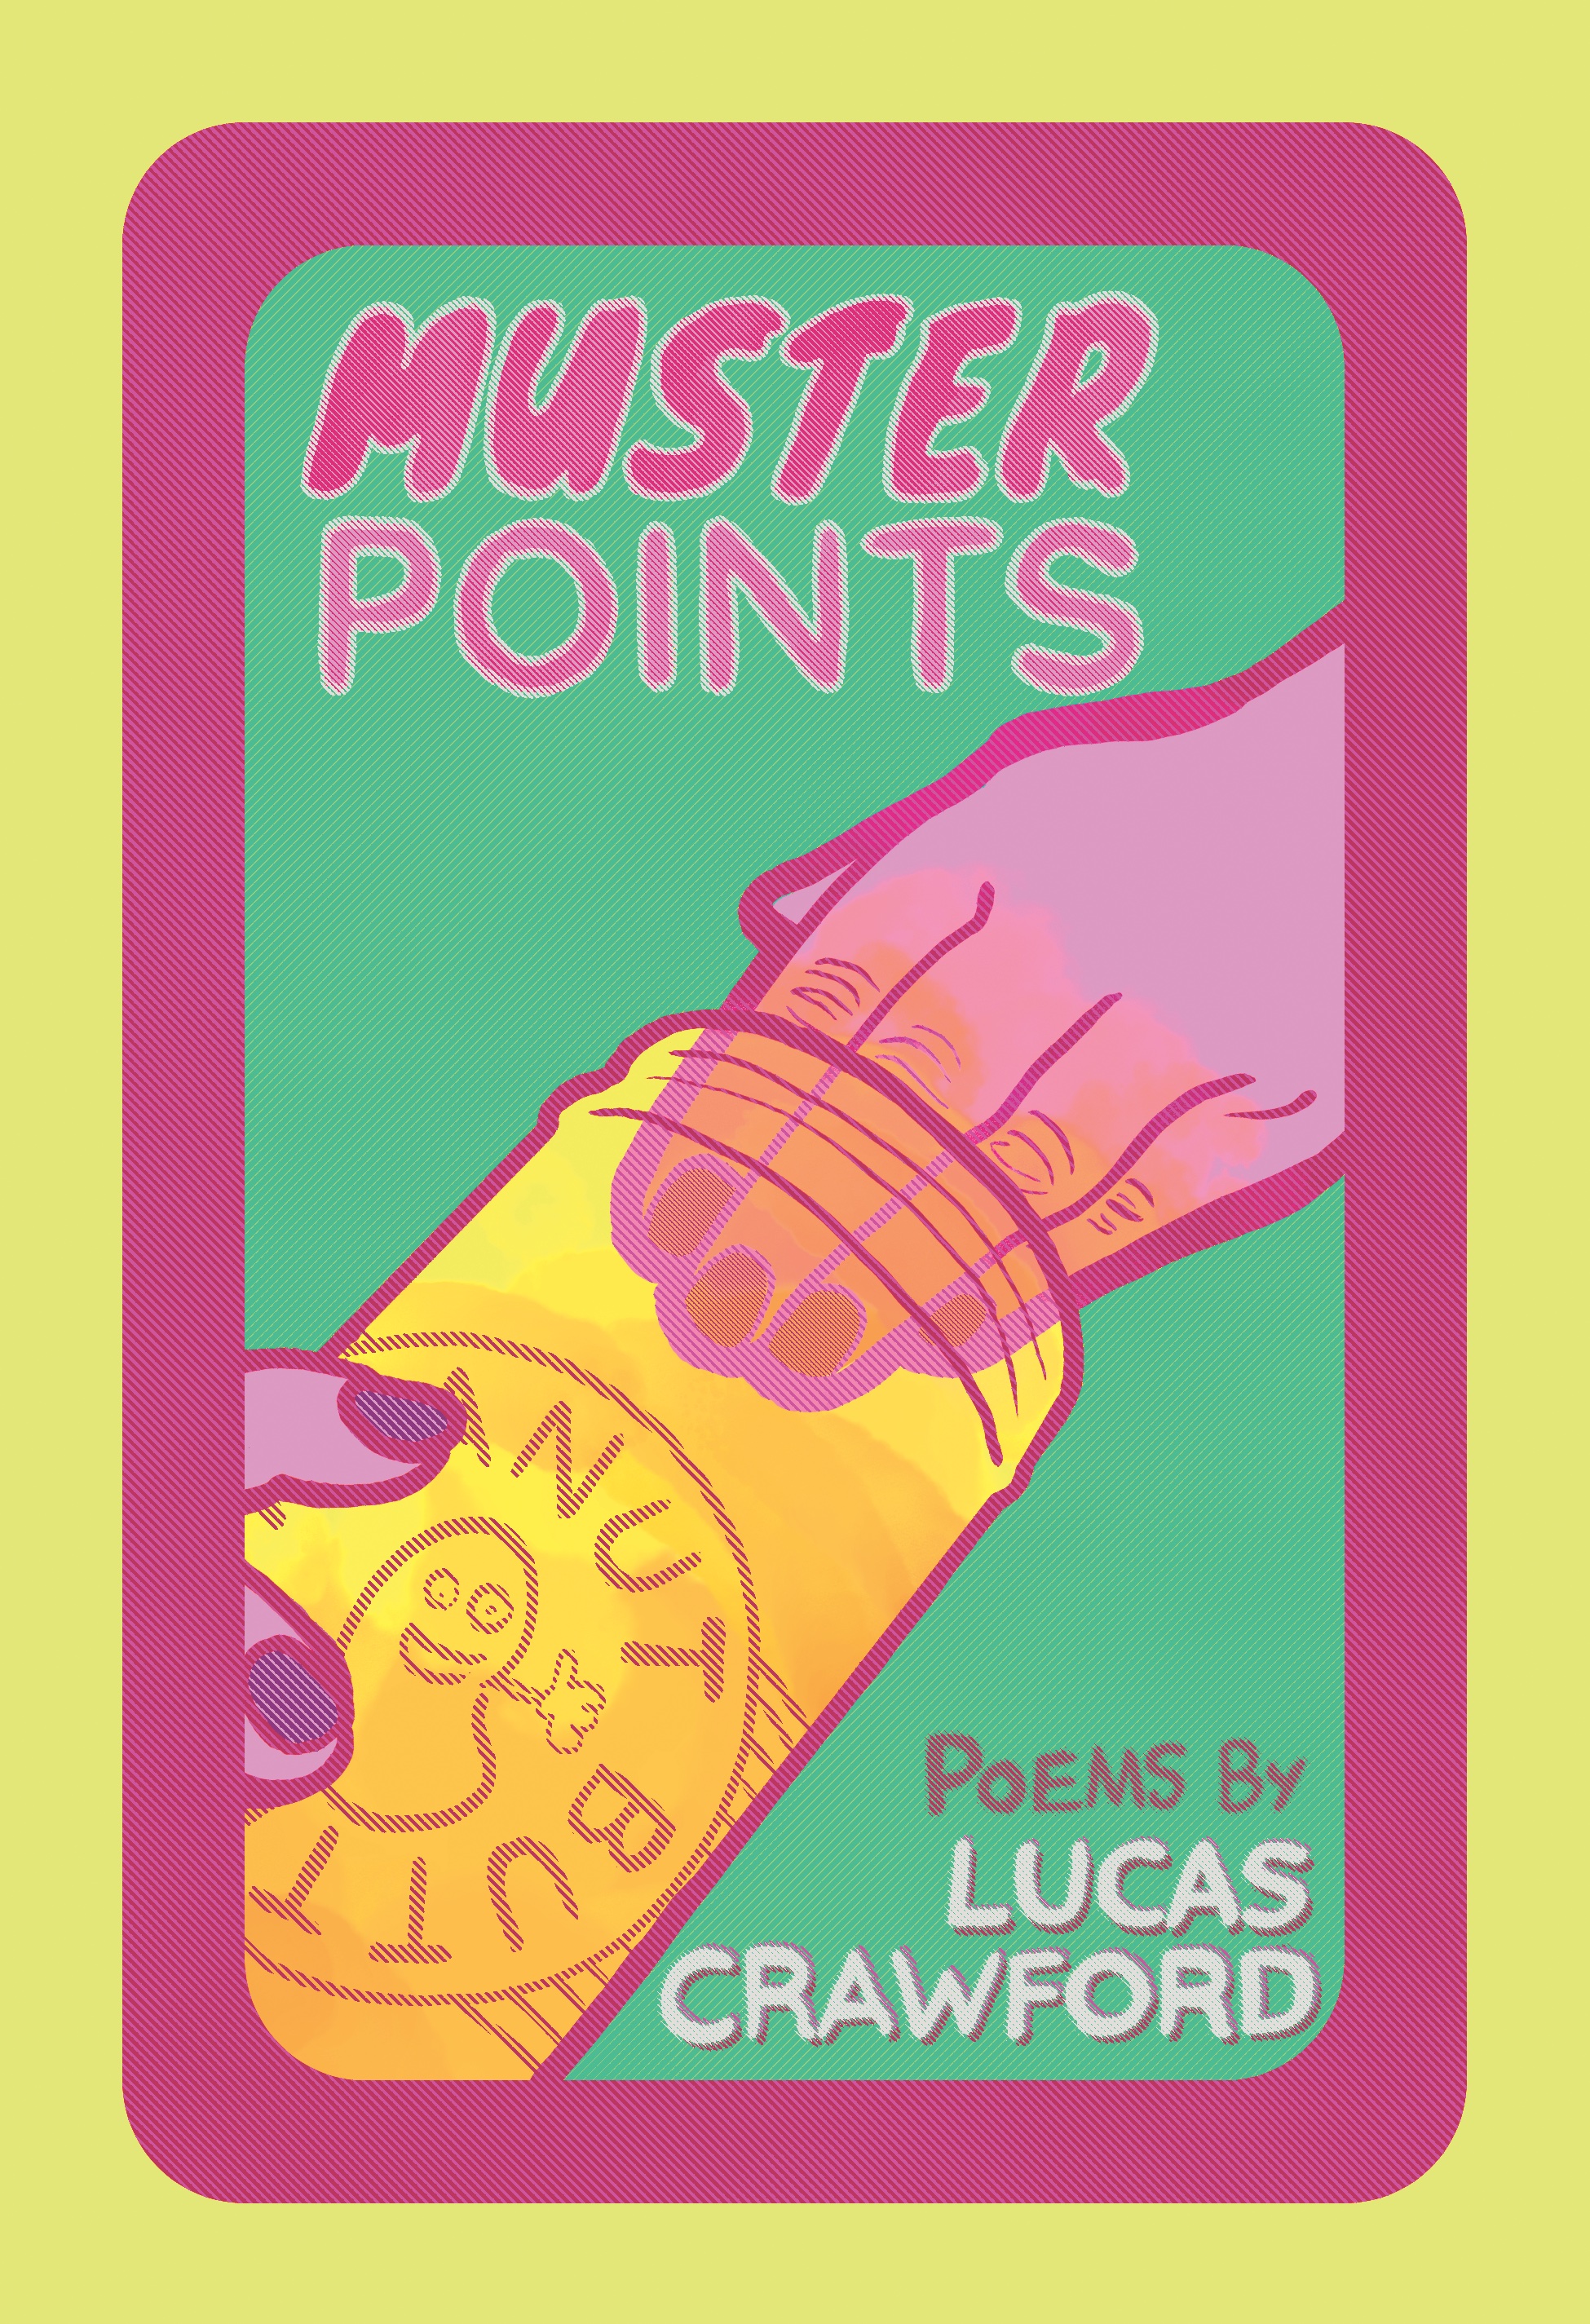 Book Cover Image for: Muster Points